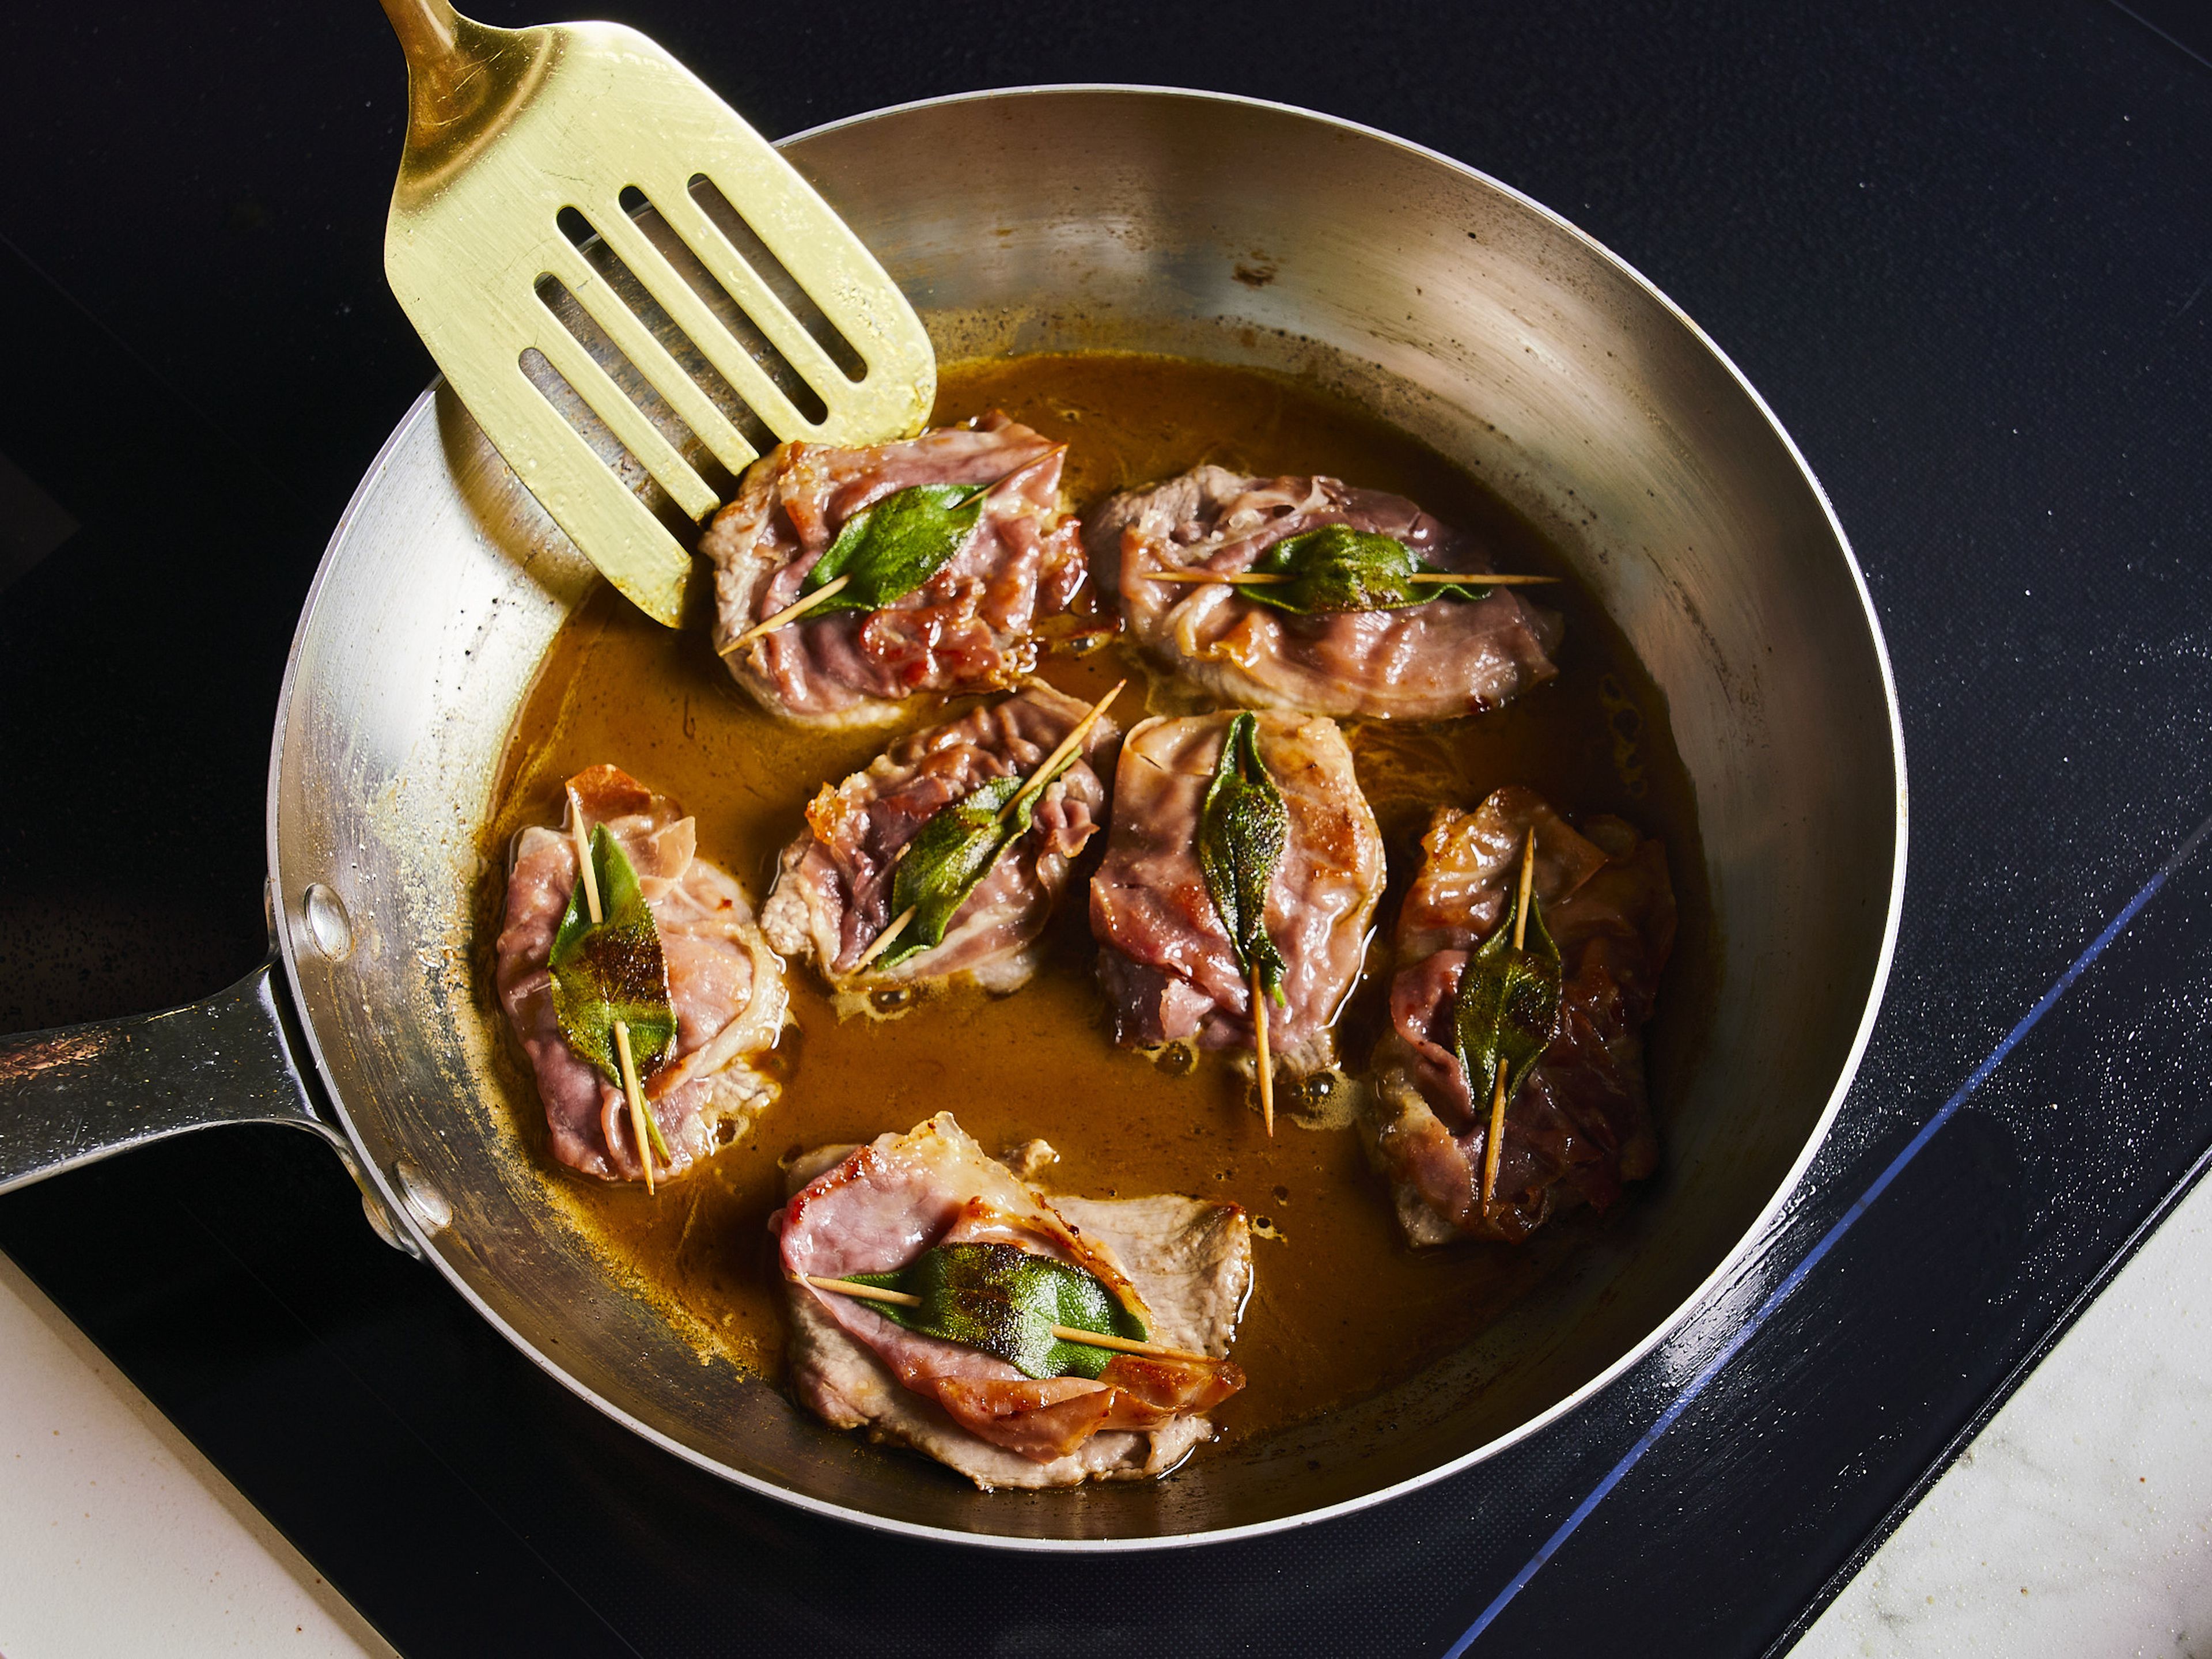 Remove the toothpicks, place the saltimbocca in the pan and reheat briefly in the sauce. Serve with side dishes of your choice, drizzle with sauce and sprinkle with freshly ground pepper.